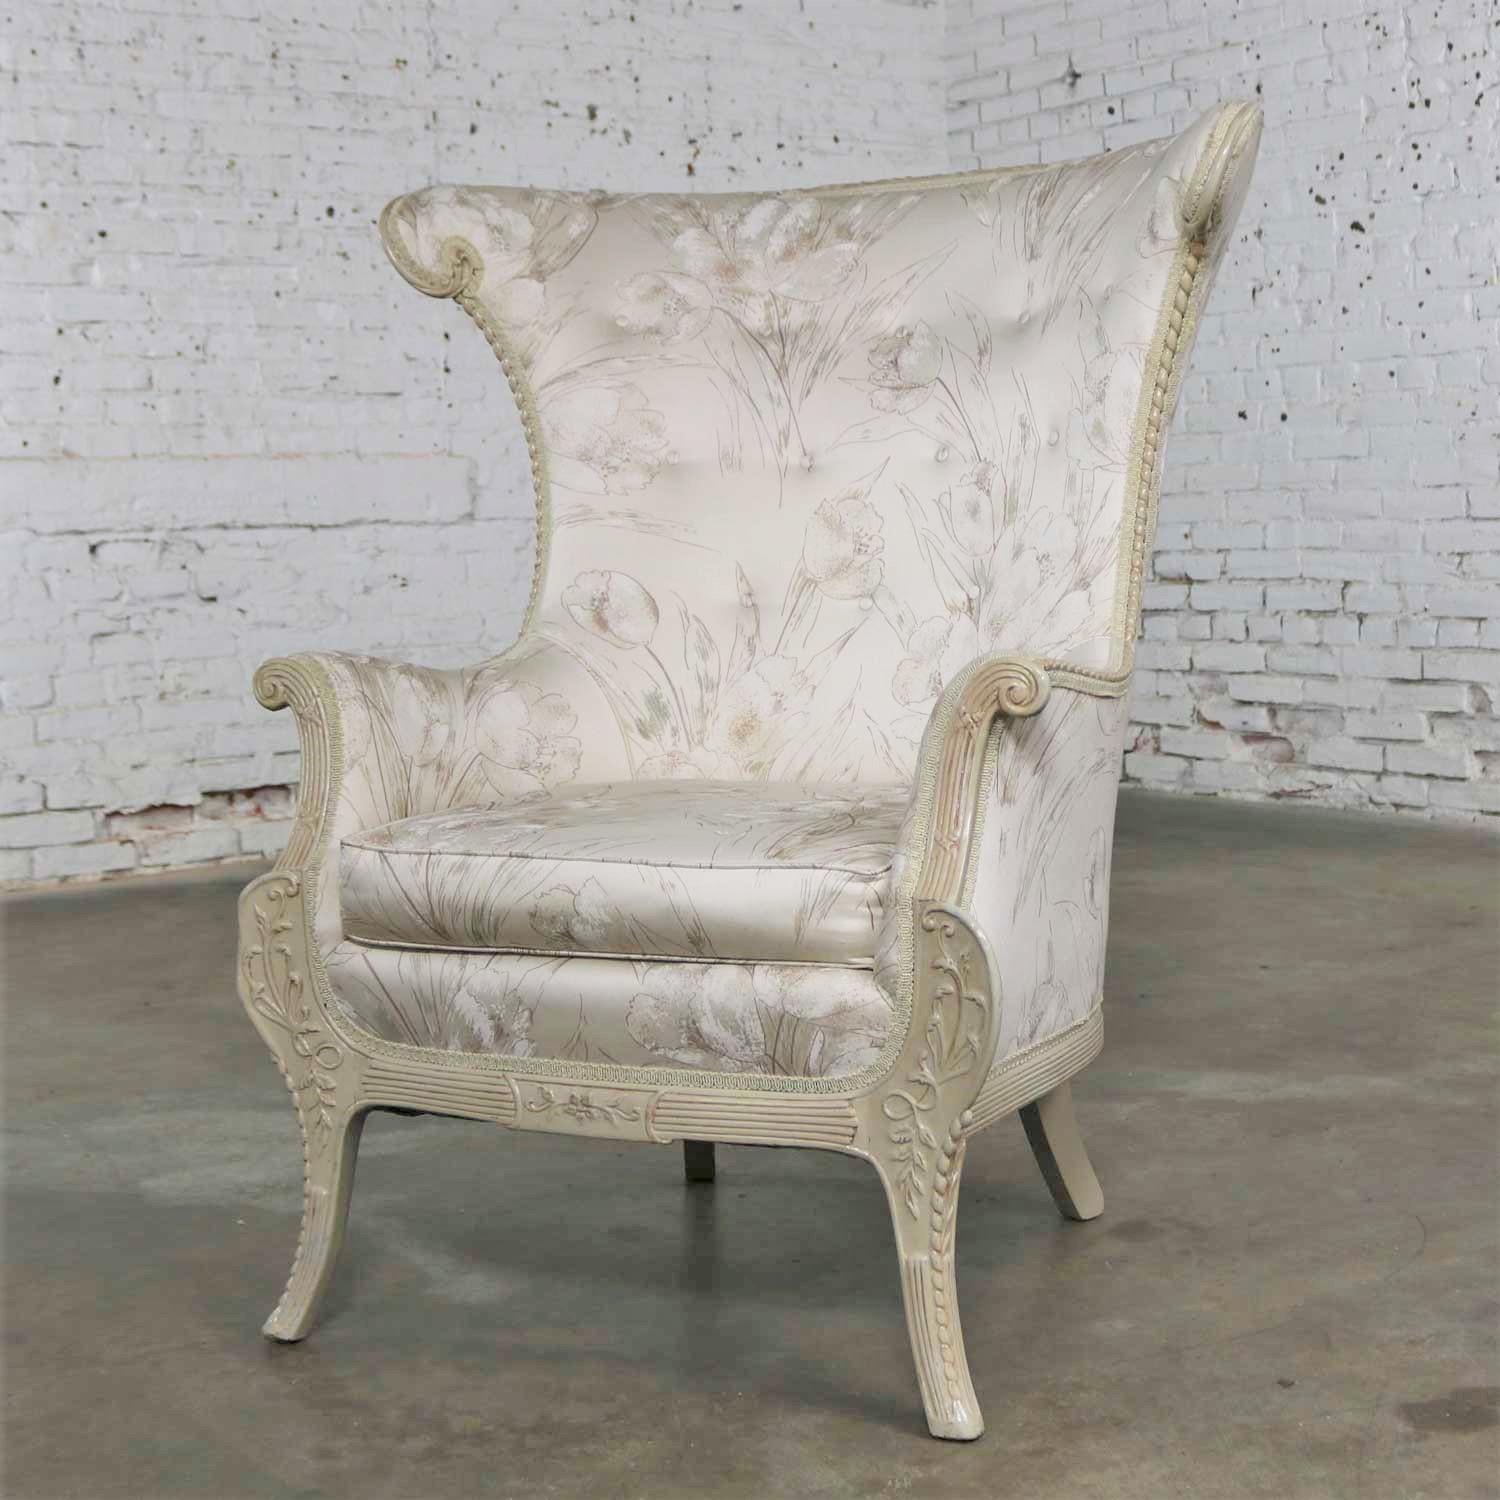 Neoclassical Revival Neoclassic French Style Large Wingback Lounge Chair in Antique White